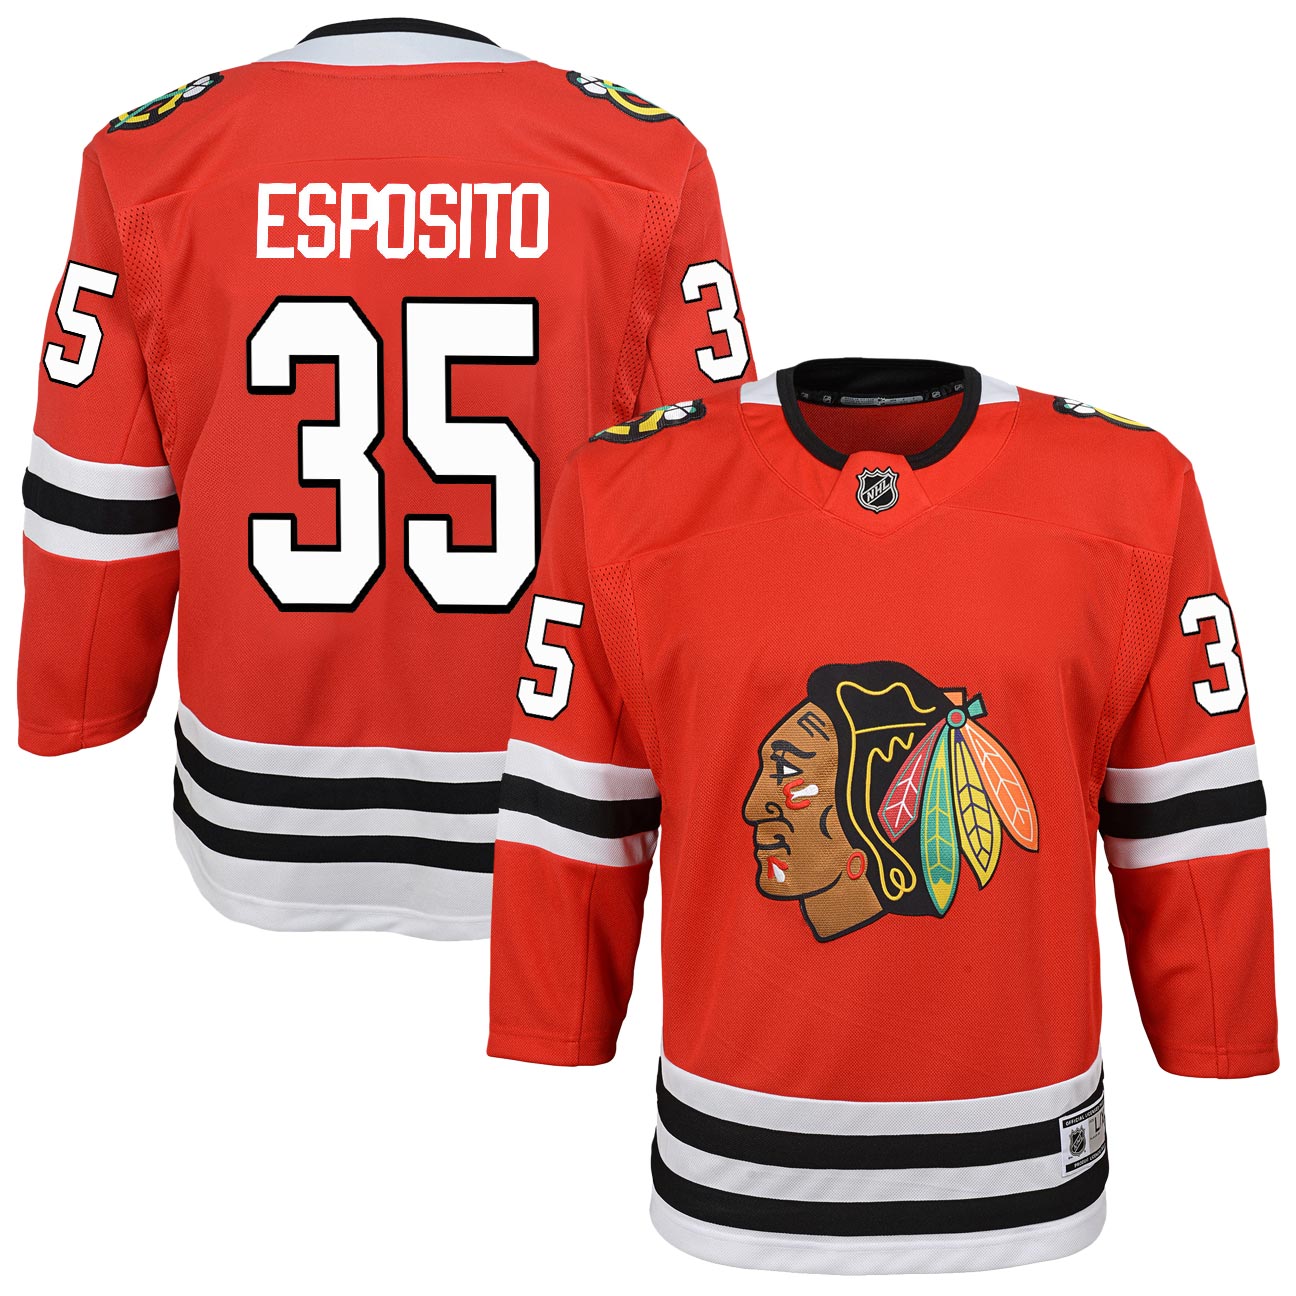 Chicago Blackhawks clearance jersey